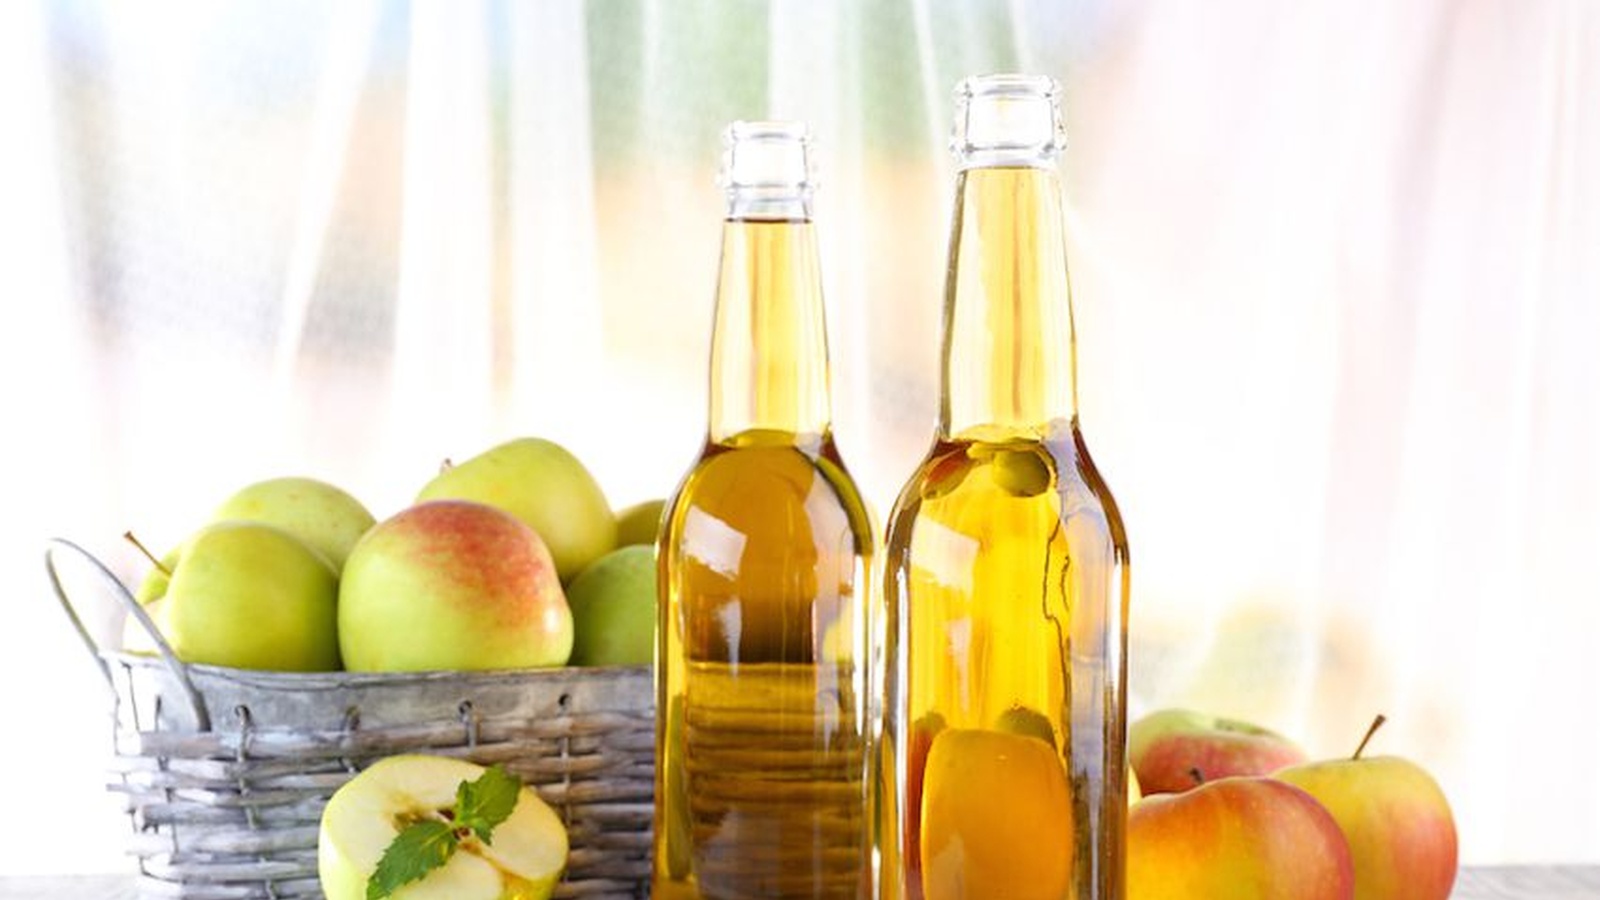 22 Uses of Apple Cider Vinegar in the Home